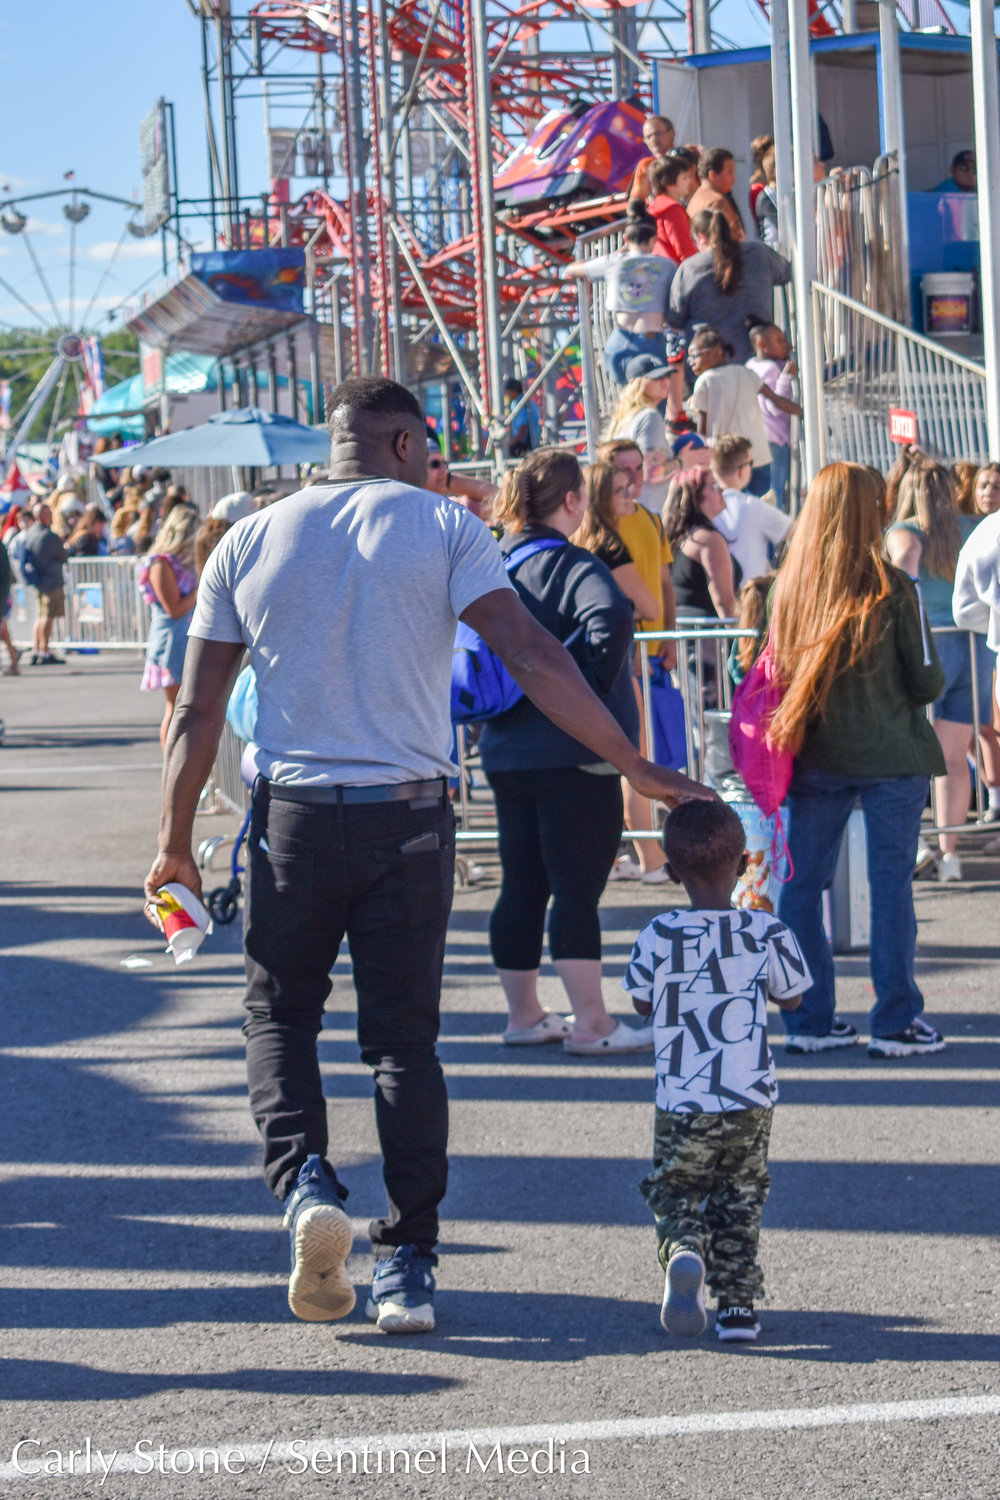 Flashing lights and bright colors adorned the state fair midway. These attendees, young and old, were passing by a ride called "Himalaya" where loud music is part of its allure.